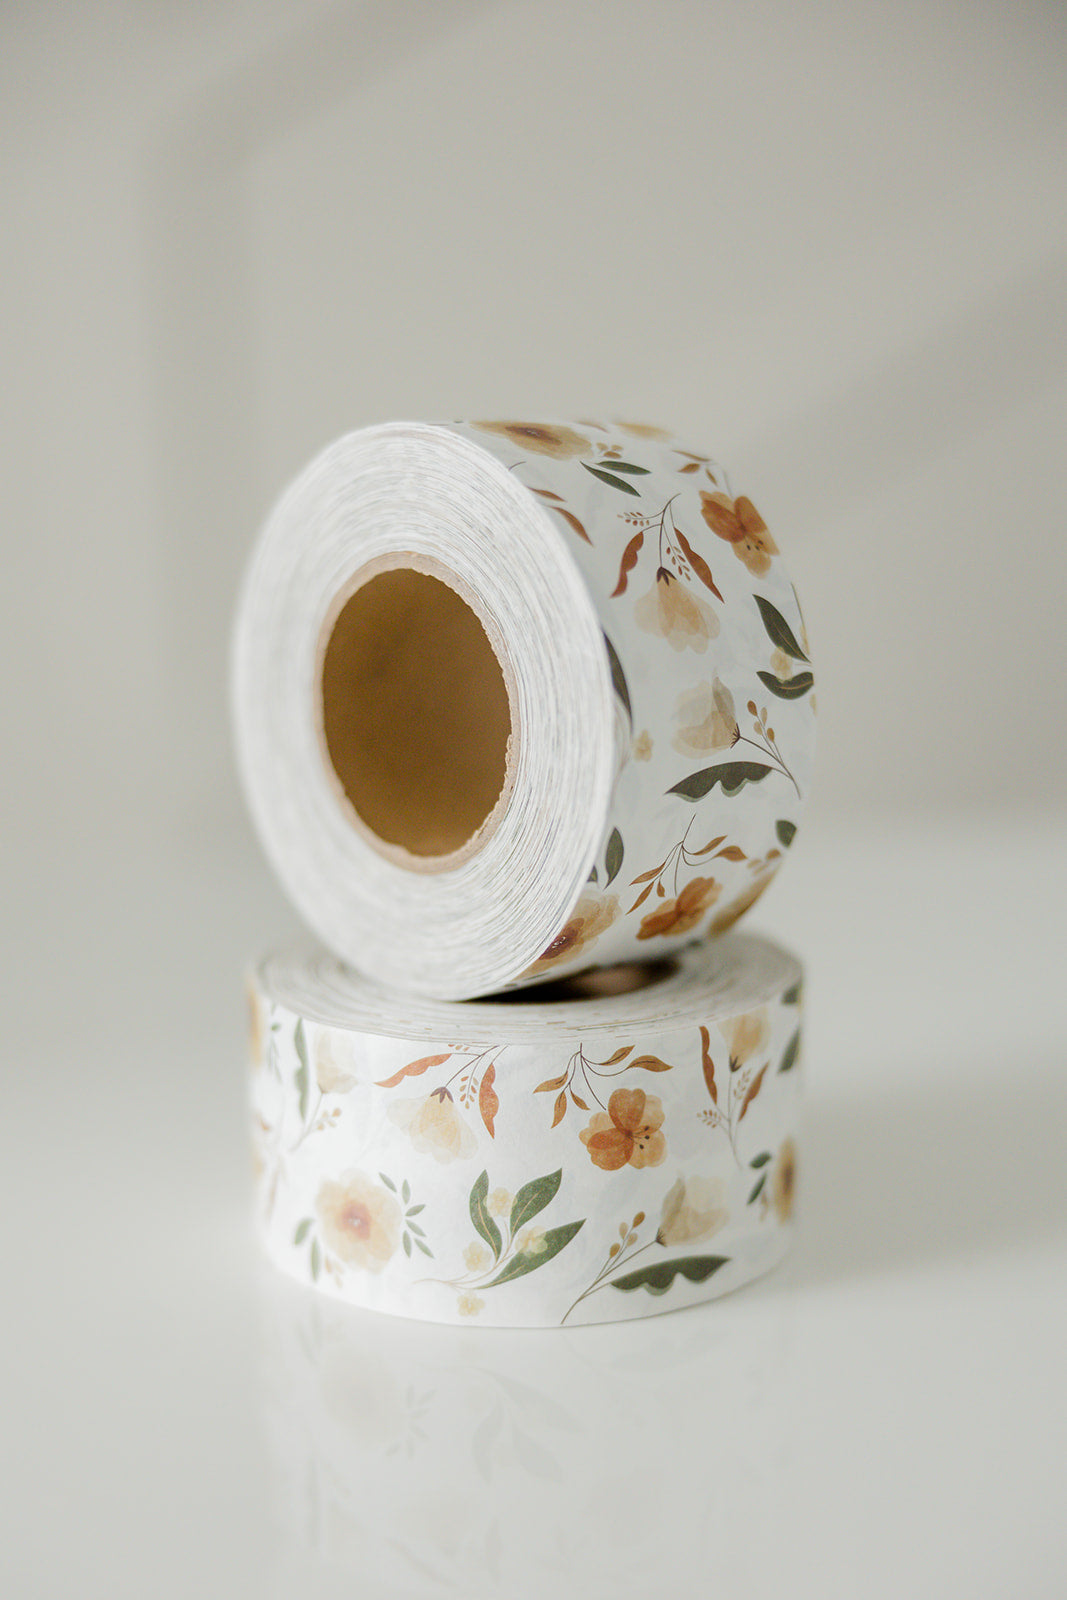 A roll of Packing Tape - Camelia Bloom by impack.co on a white surface.